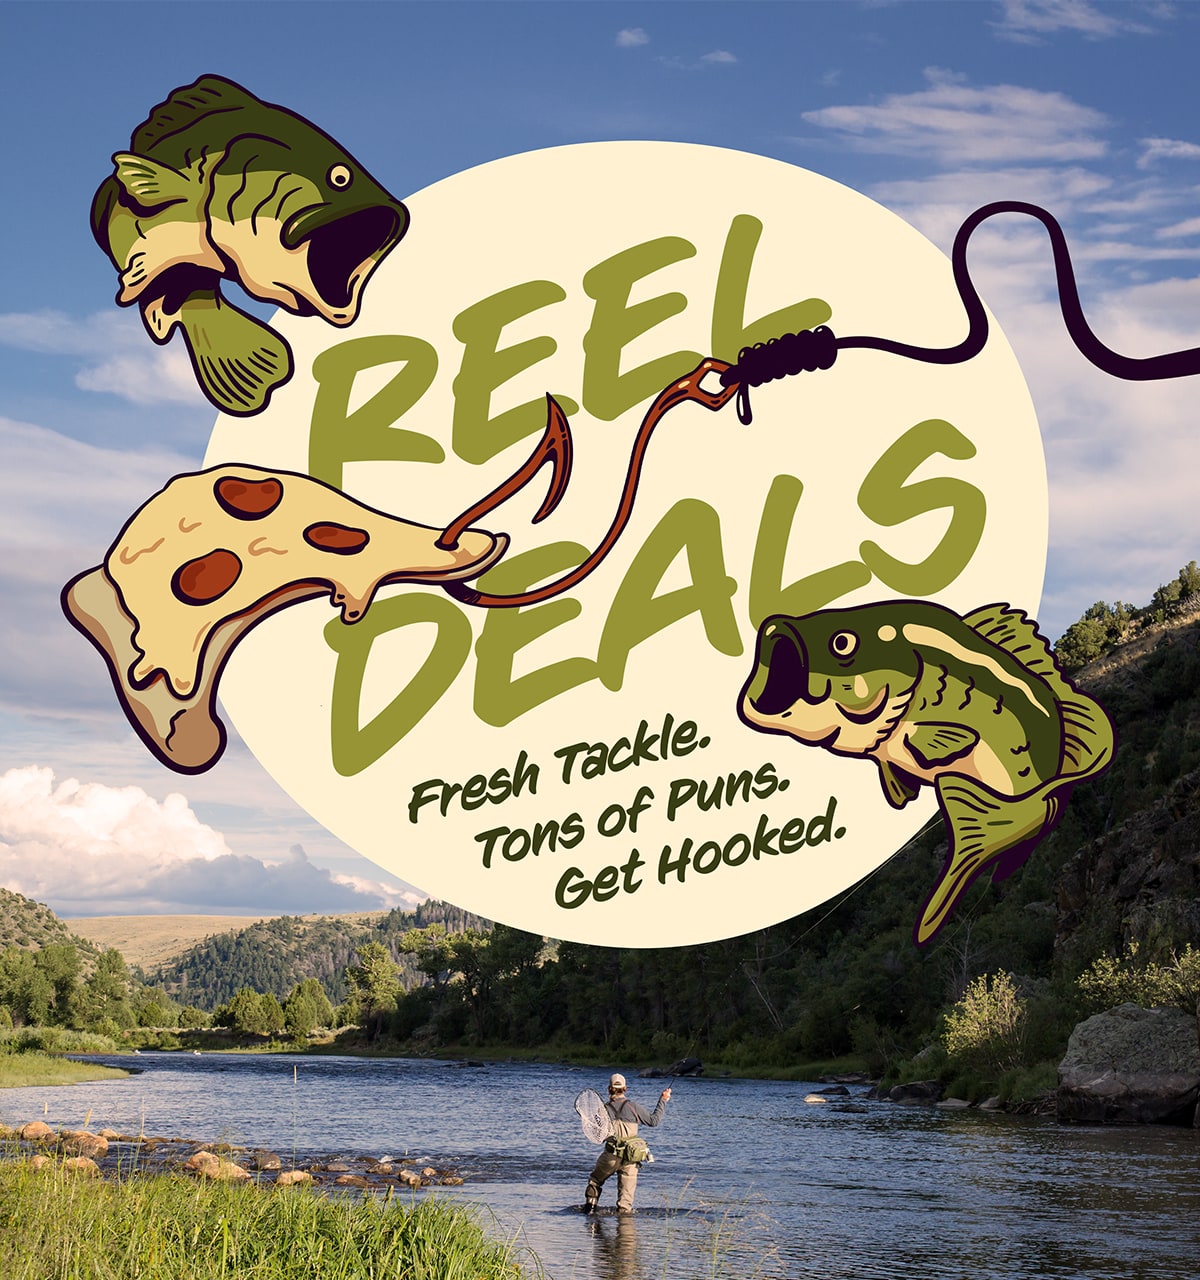 Big discounts on fishing gear from Lew's, 13 Fishing, Rapala and